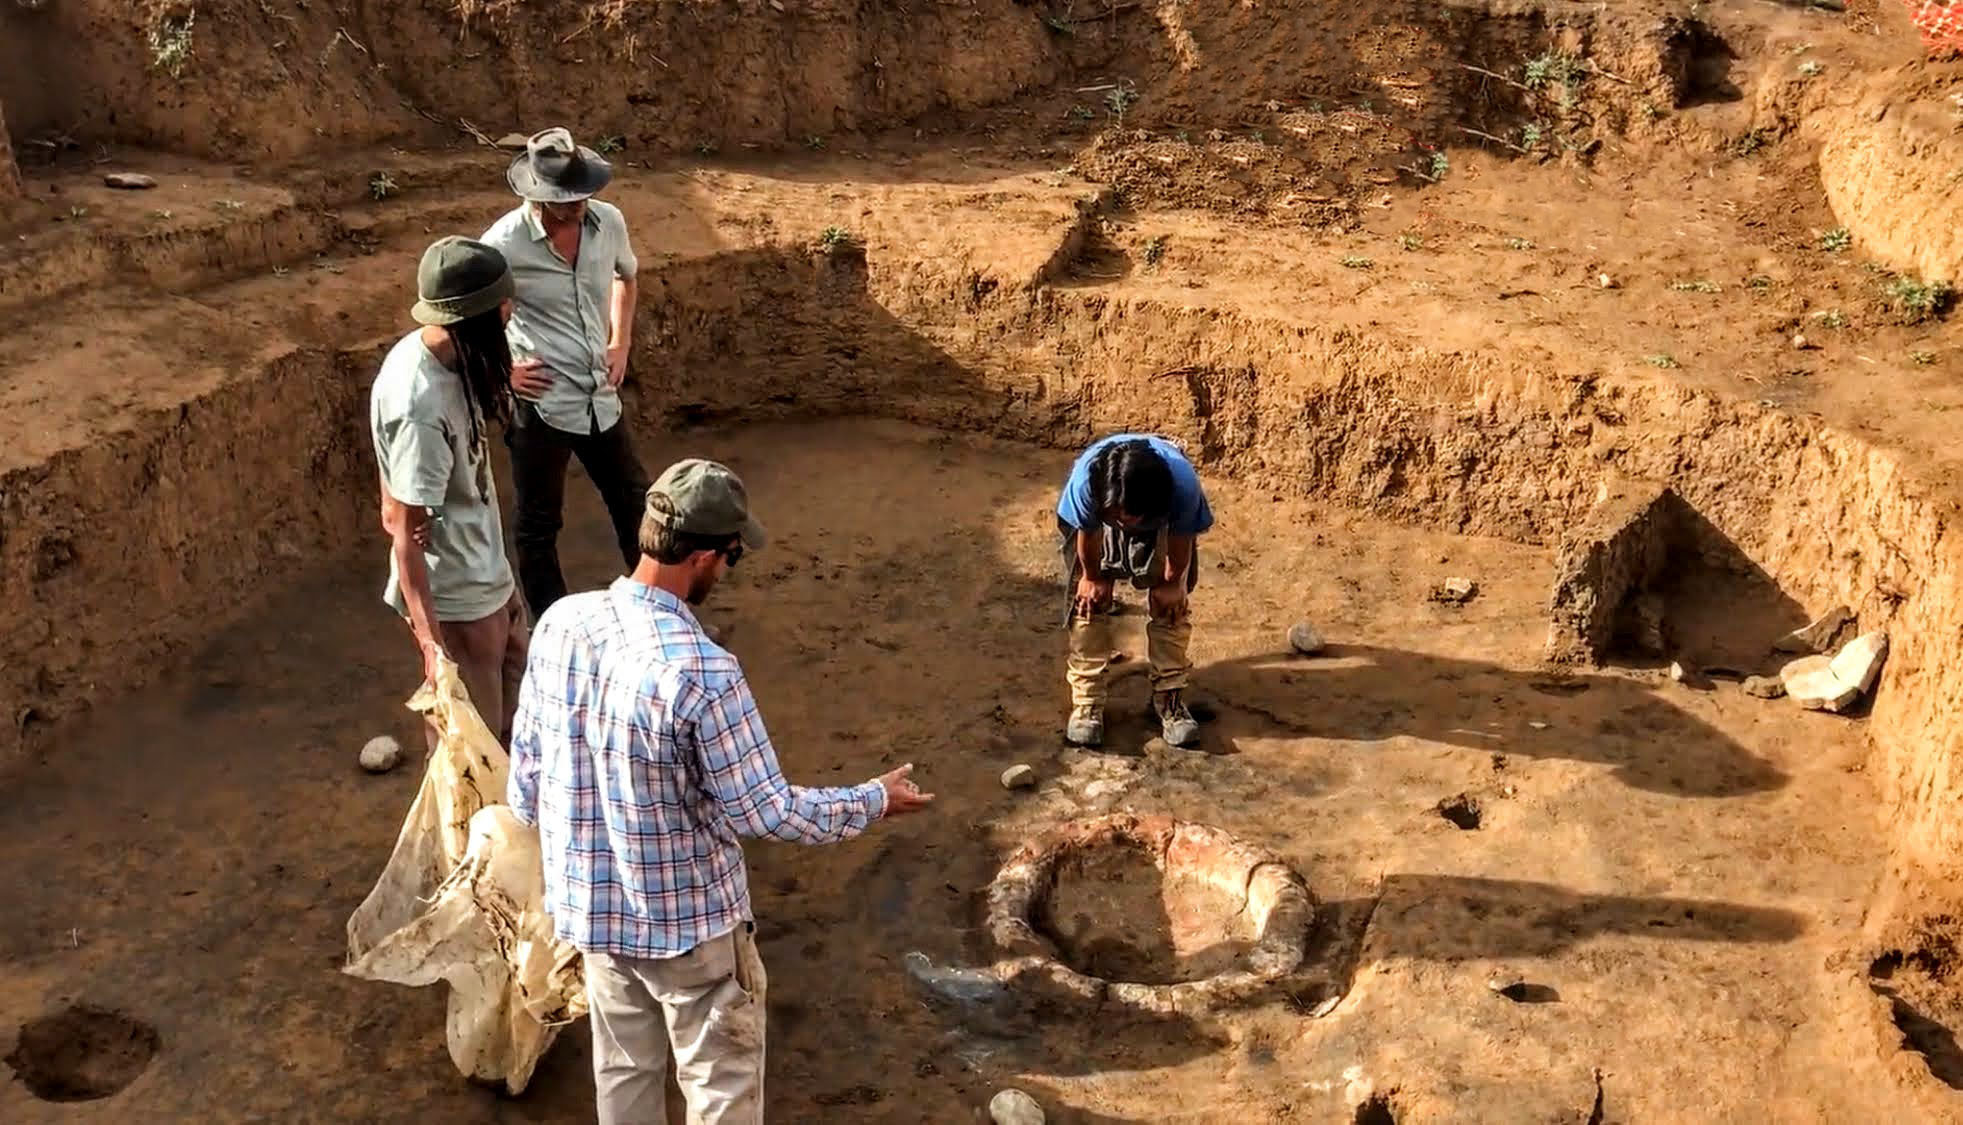 Archeology crew on dig site in Durango detail image